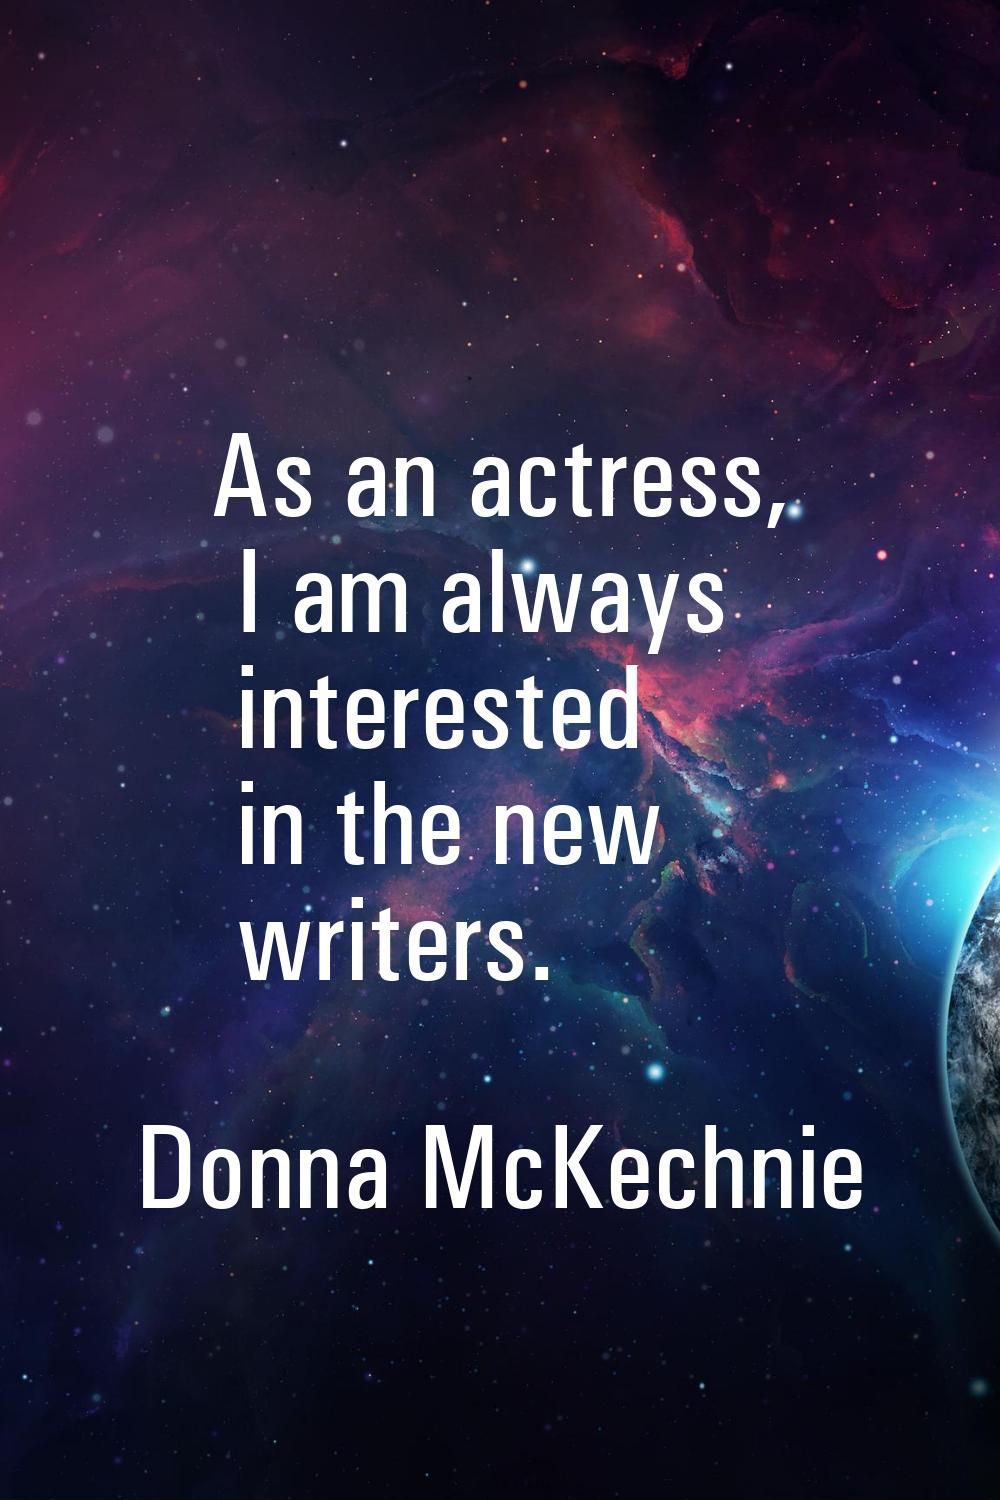 As an actress, I am always interested in the new writers.